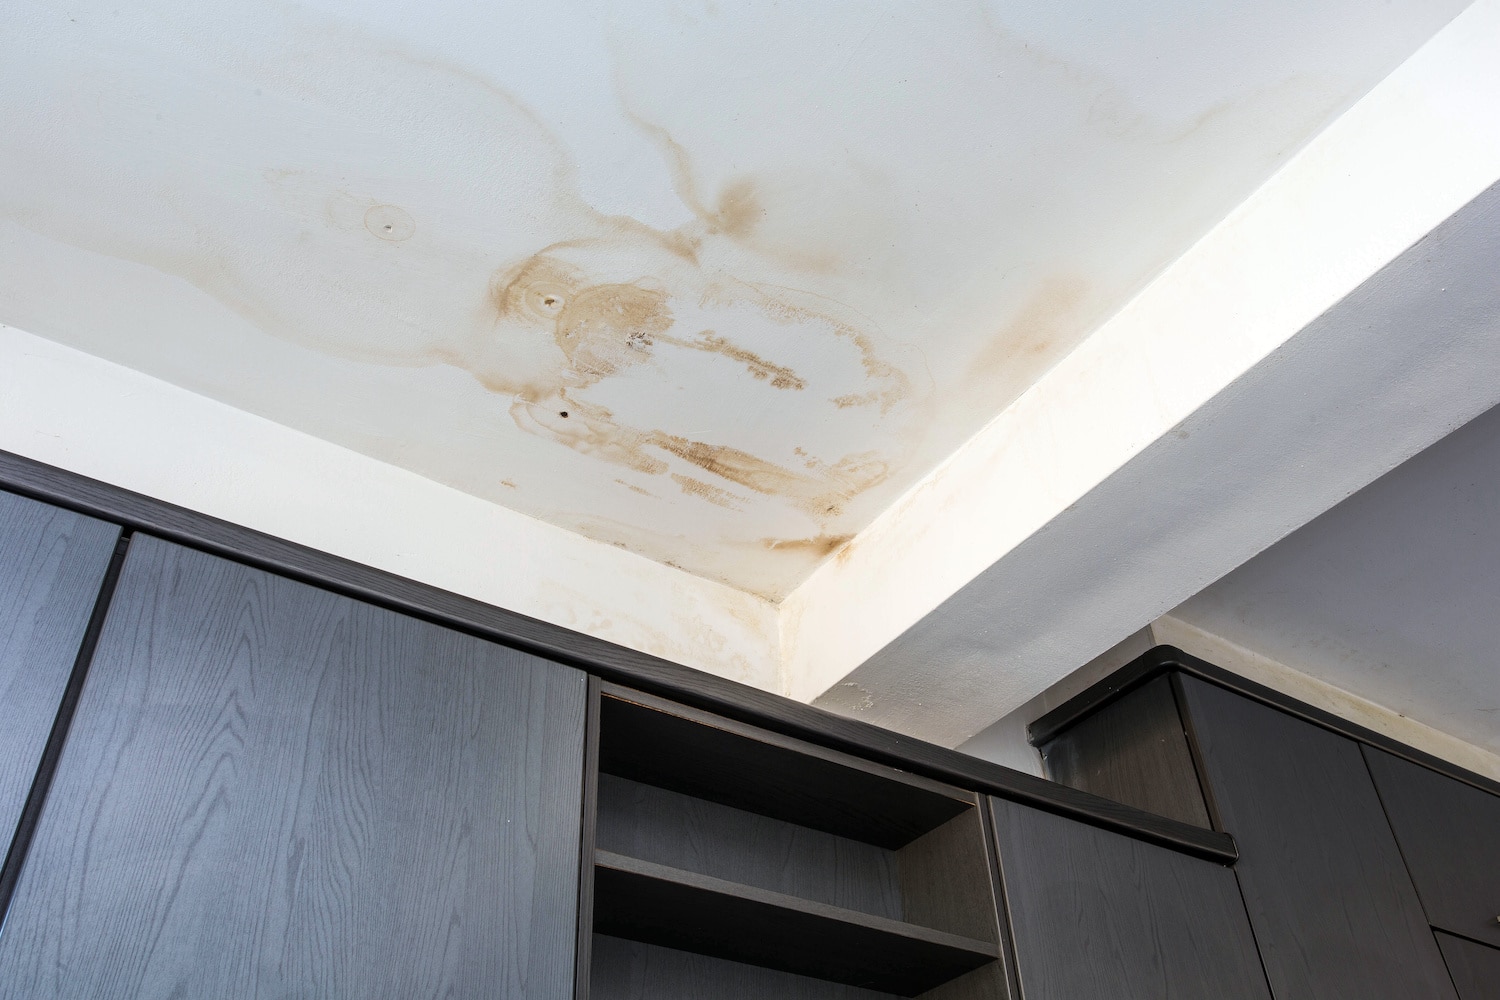 how to find a roof leak stain